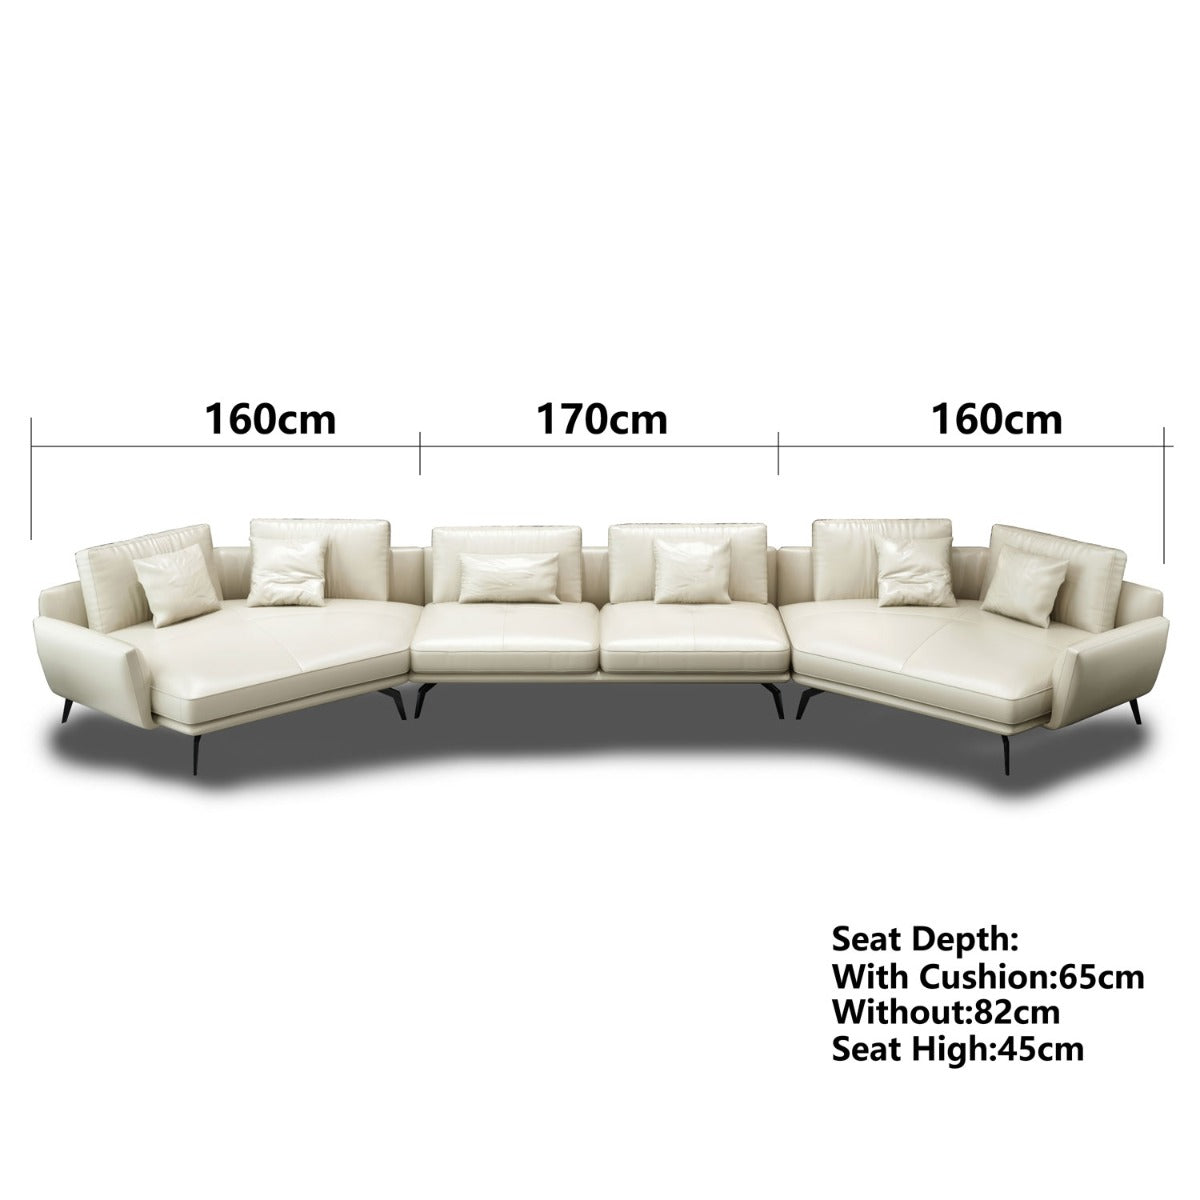 European Furniture - Venere 6 Seater Sectional in Off White Italian Leather - 65557-6S - New Star Living